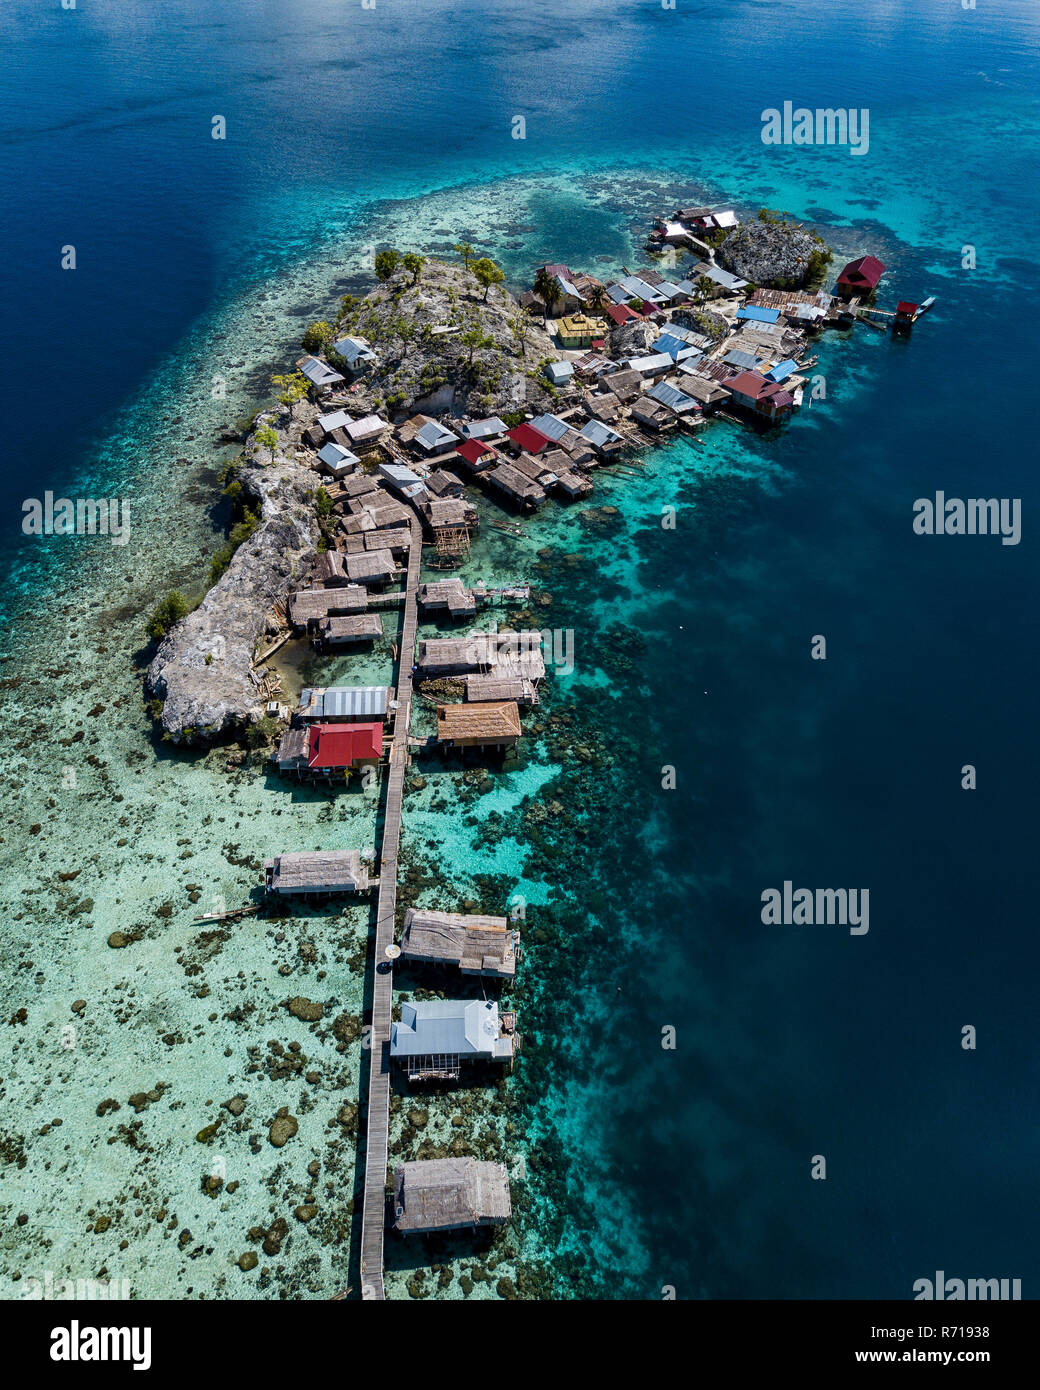 An aerial view of the bajo sea gypsy village of the Togian islands in Sulawesi, Indonesia Stock Photo